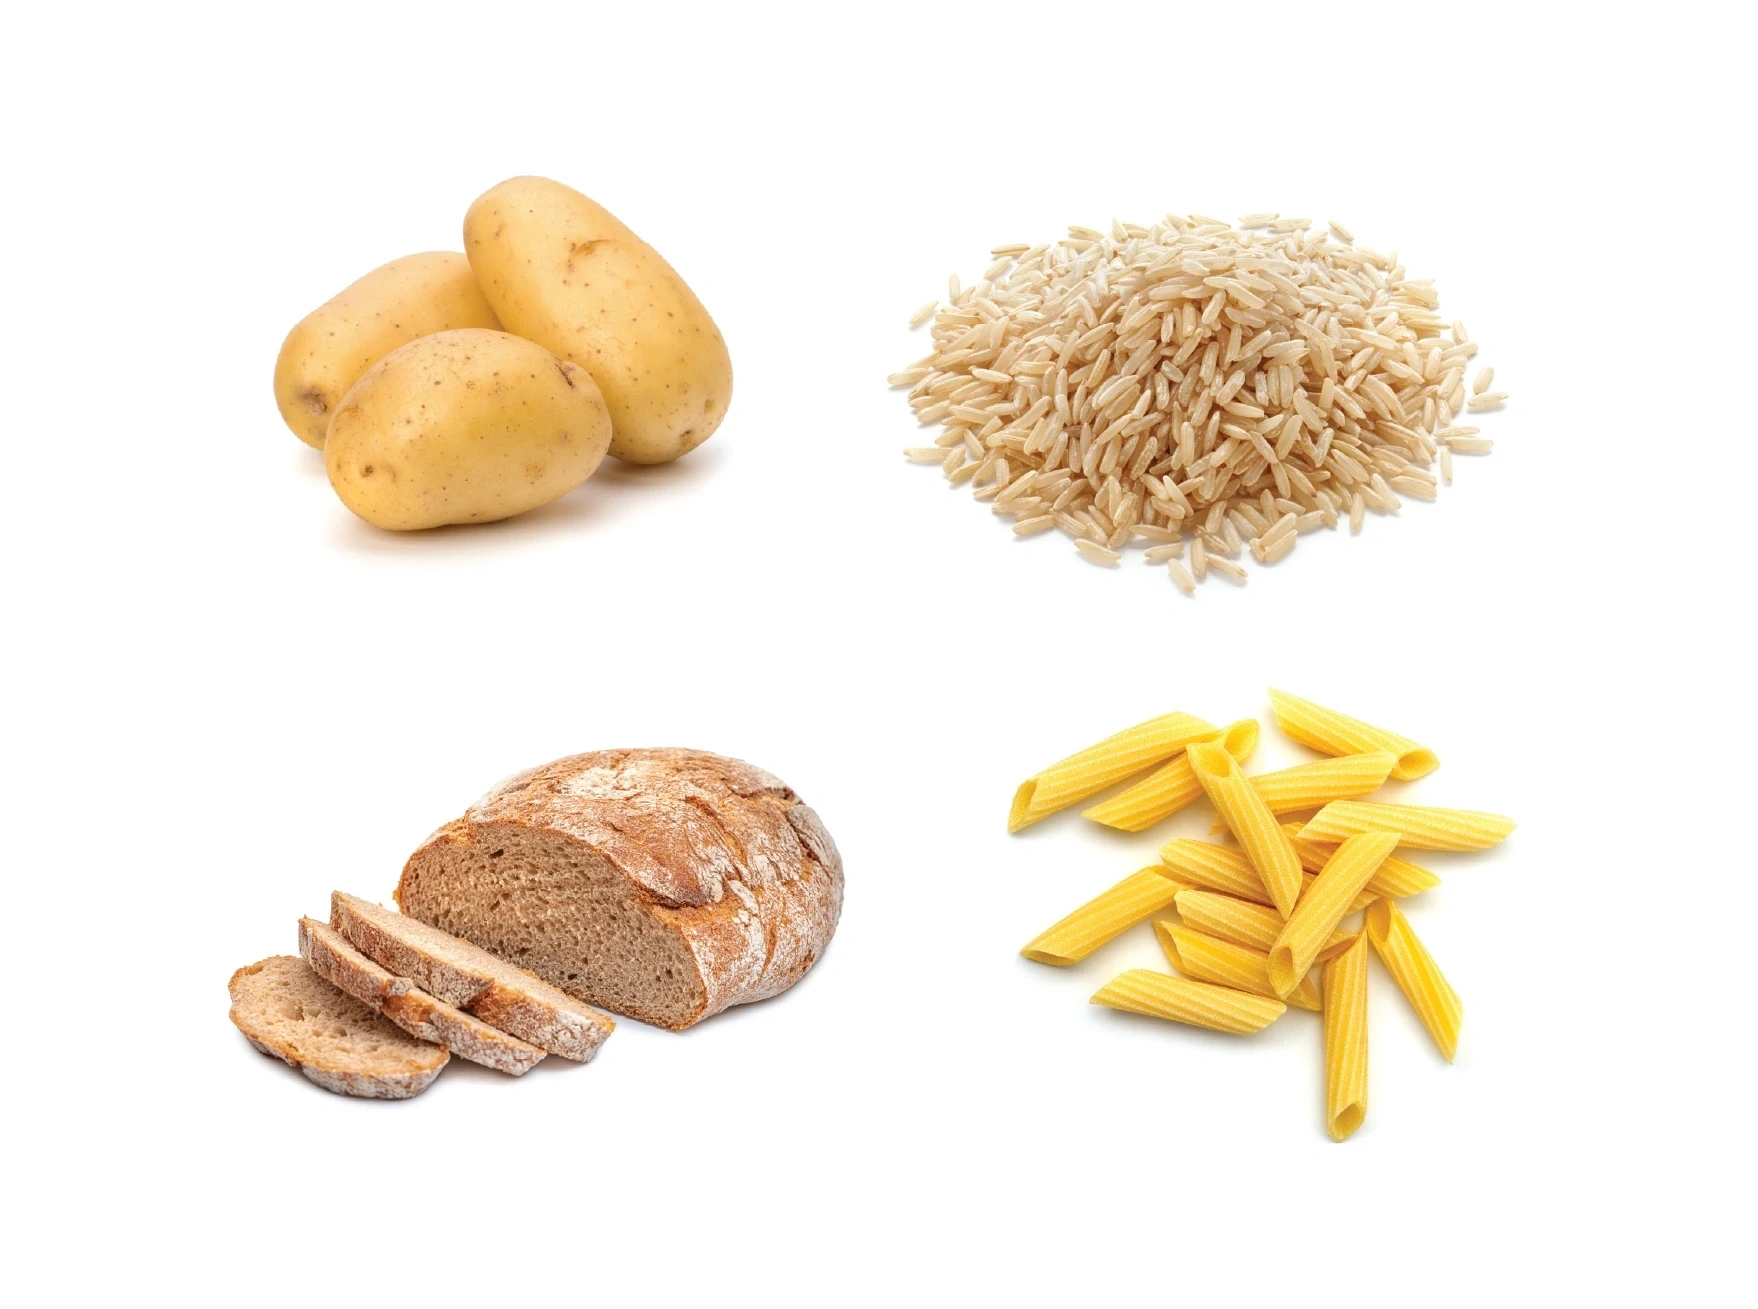 Carbohydrate foods